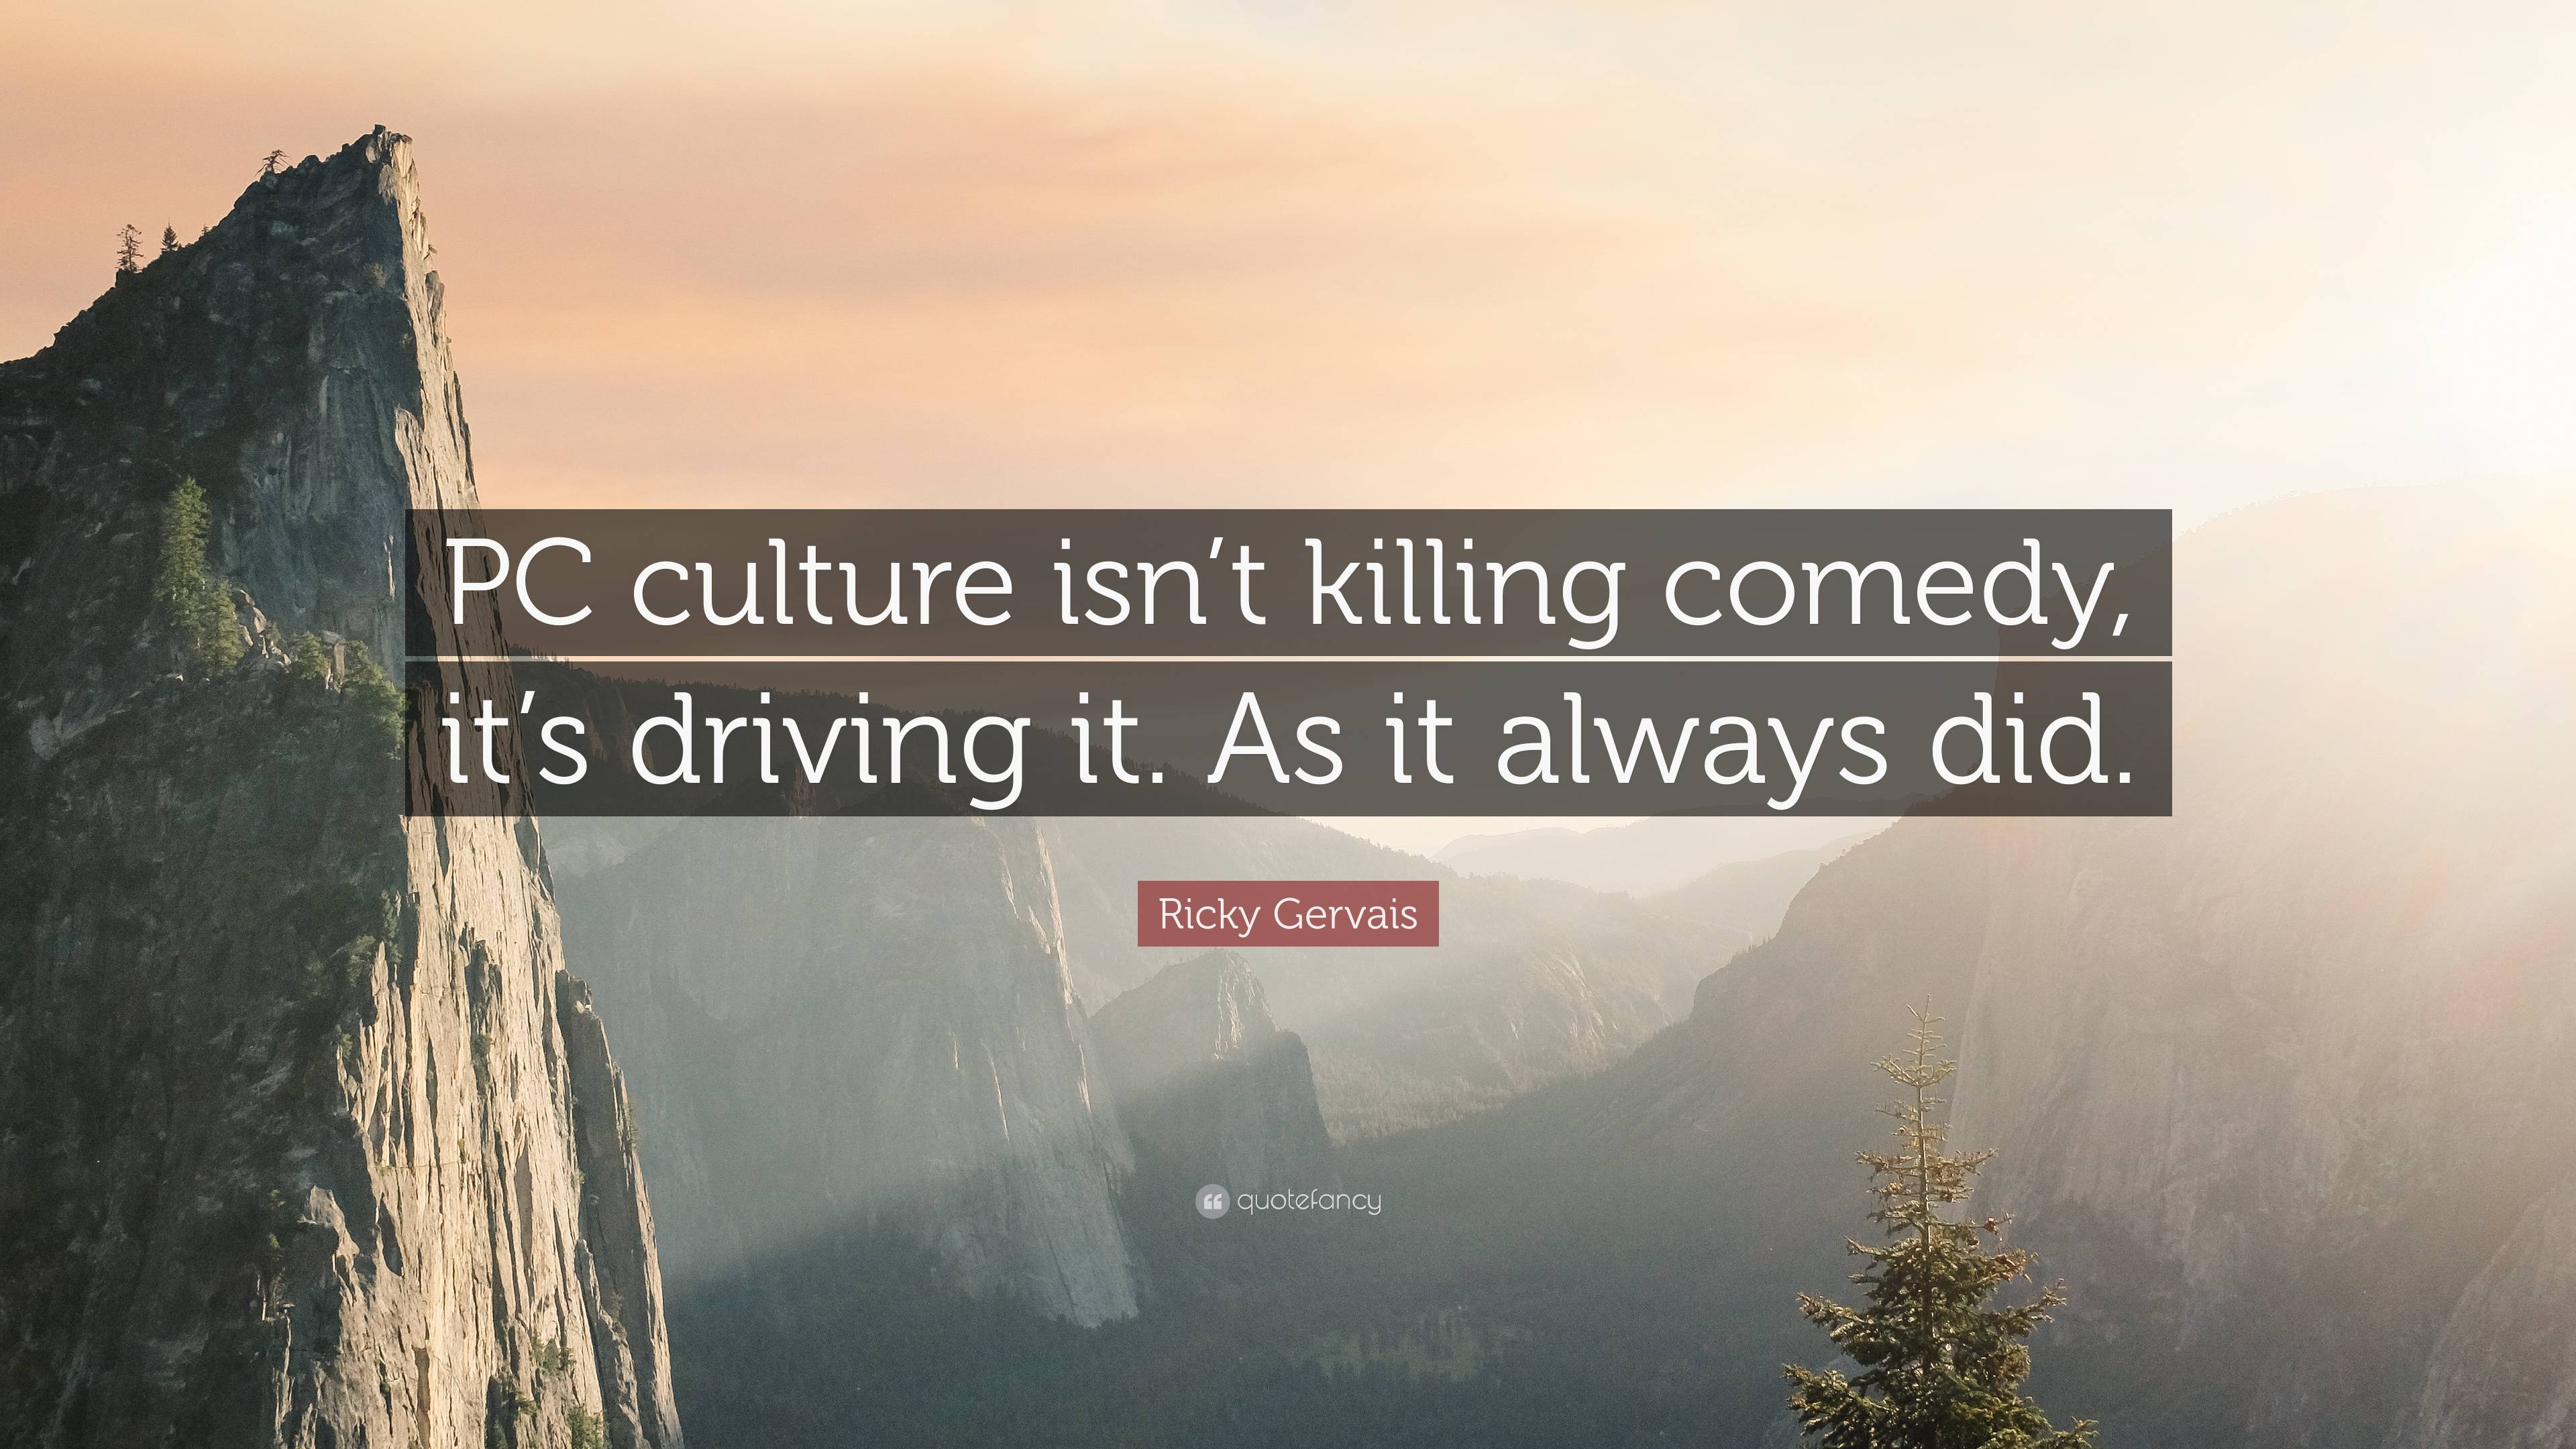 Ricky Gervais Quote “pc Culture Isn T Killing Comedy It S Driving It As It Always Did ”